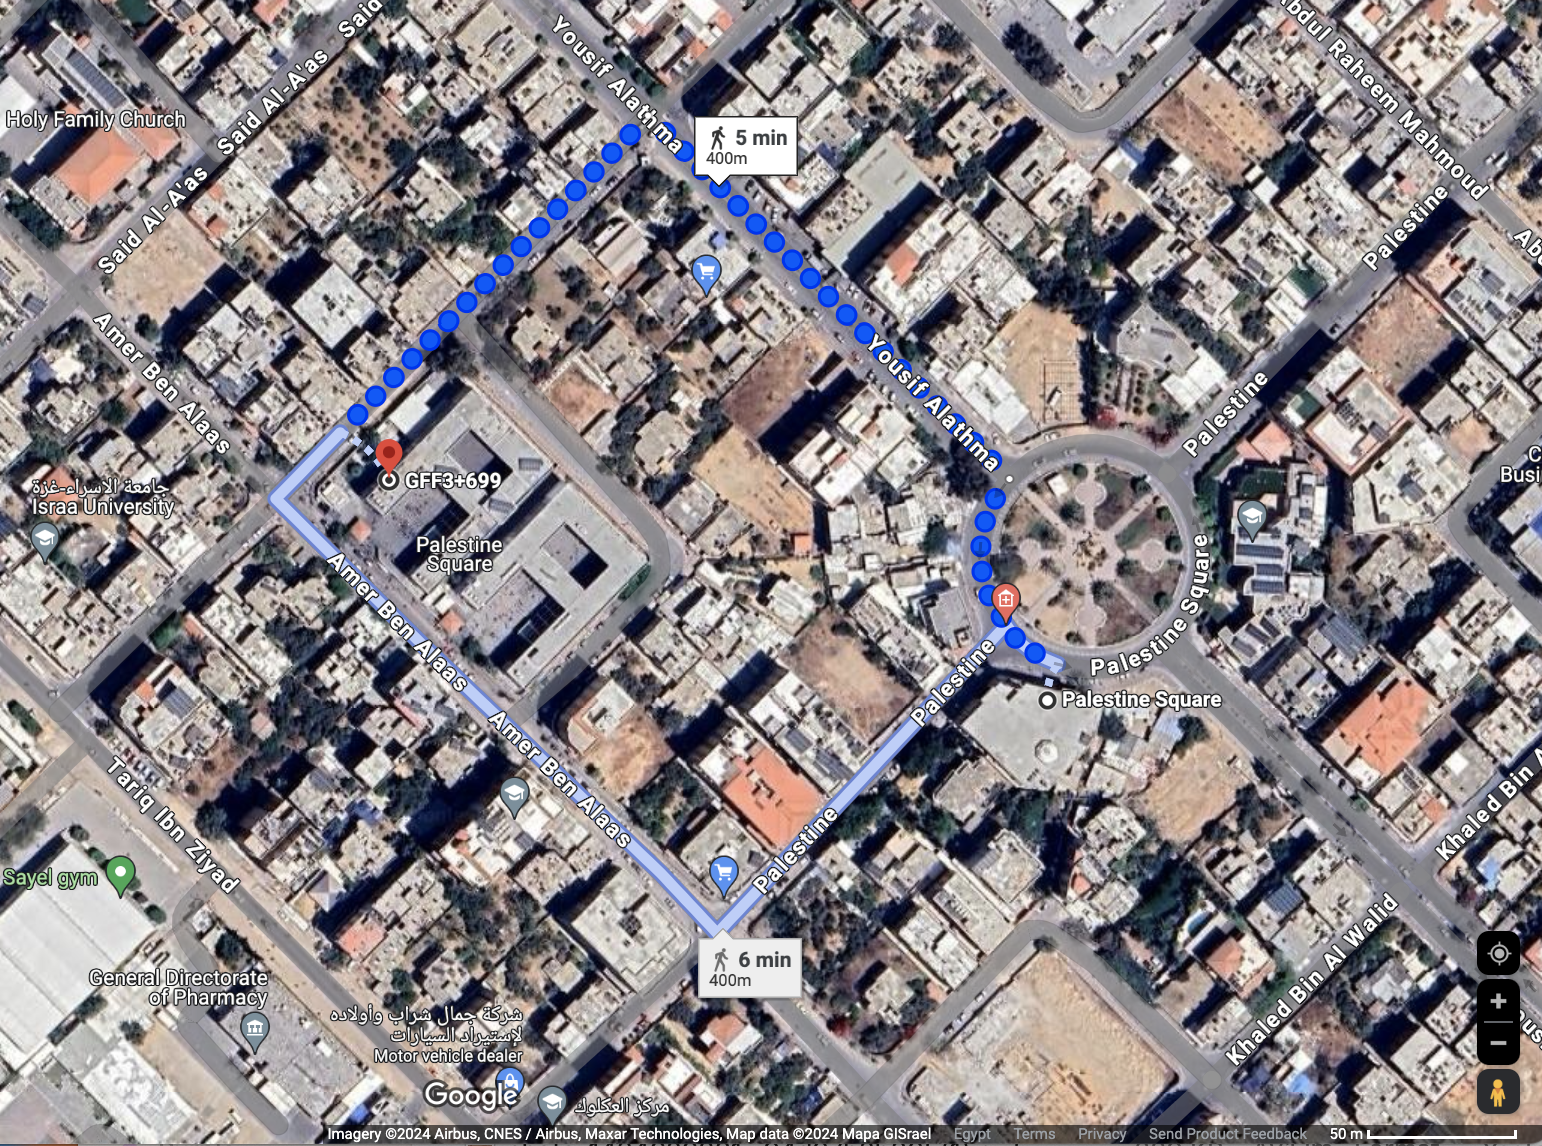 The distance between Palestine Mosque and Al-Ma'mounia Joint School is 500 meters in Al-Rimal neighborhood, north of the Gaza Strip. Source: (Google Earth)